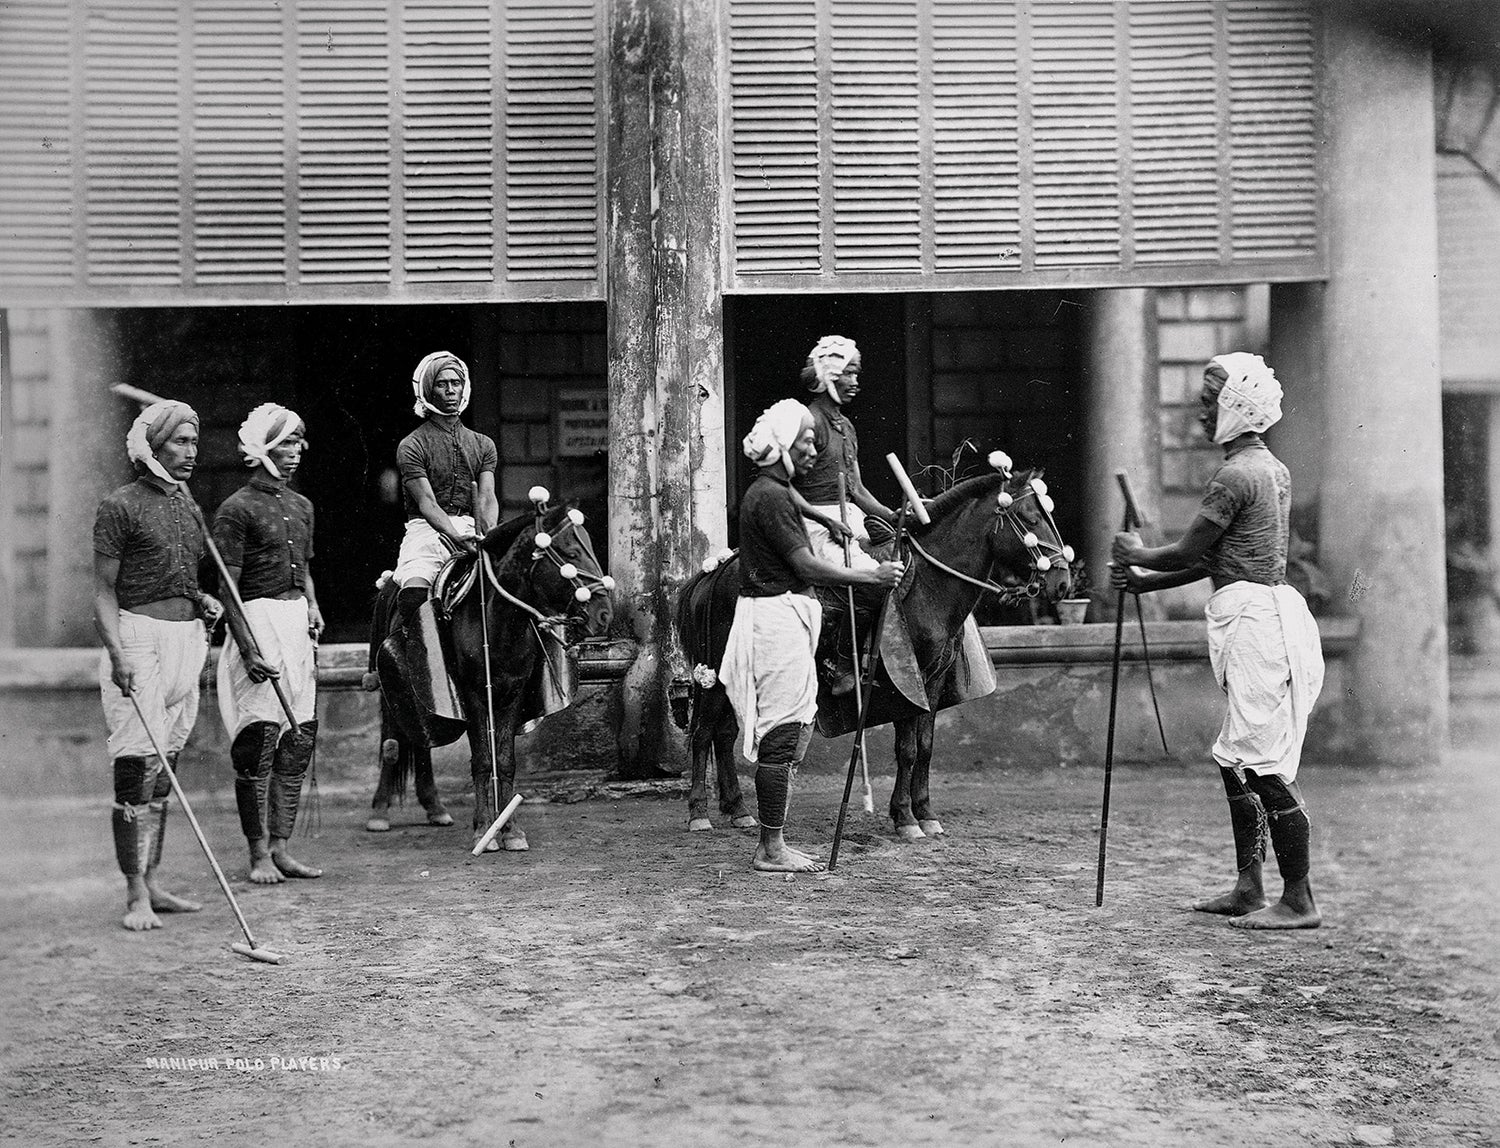 These polo players were photographed in 1875 in Manipur, India, recognized as the birthplace of modern polo. (Credit: Wikipedia)